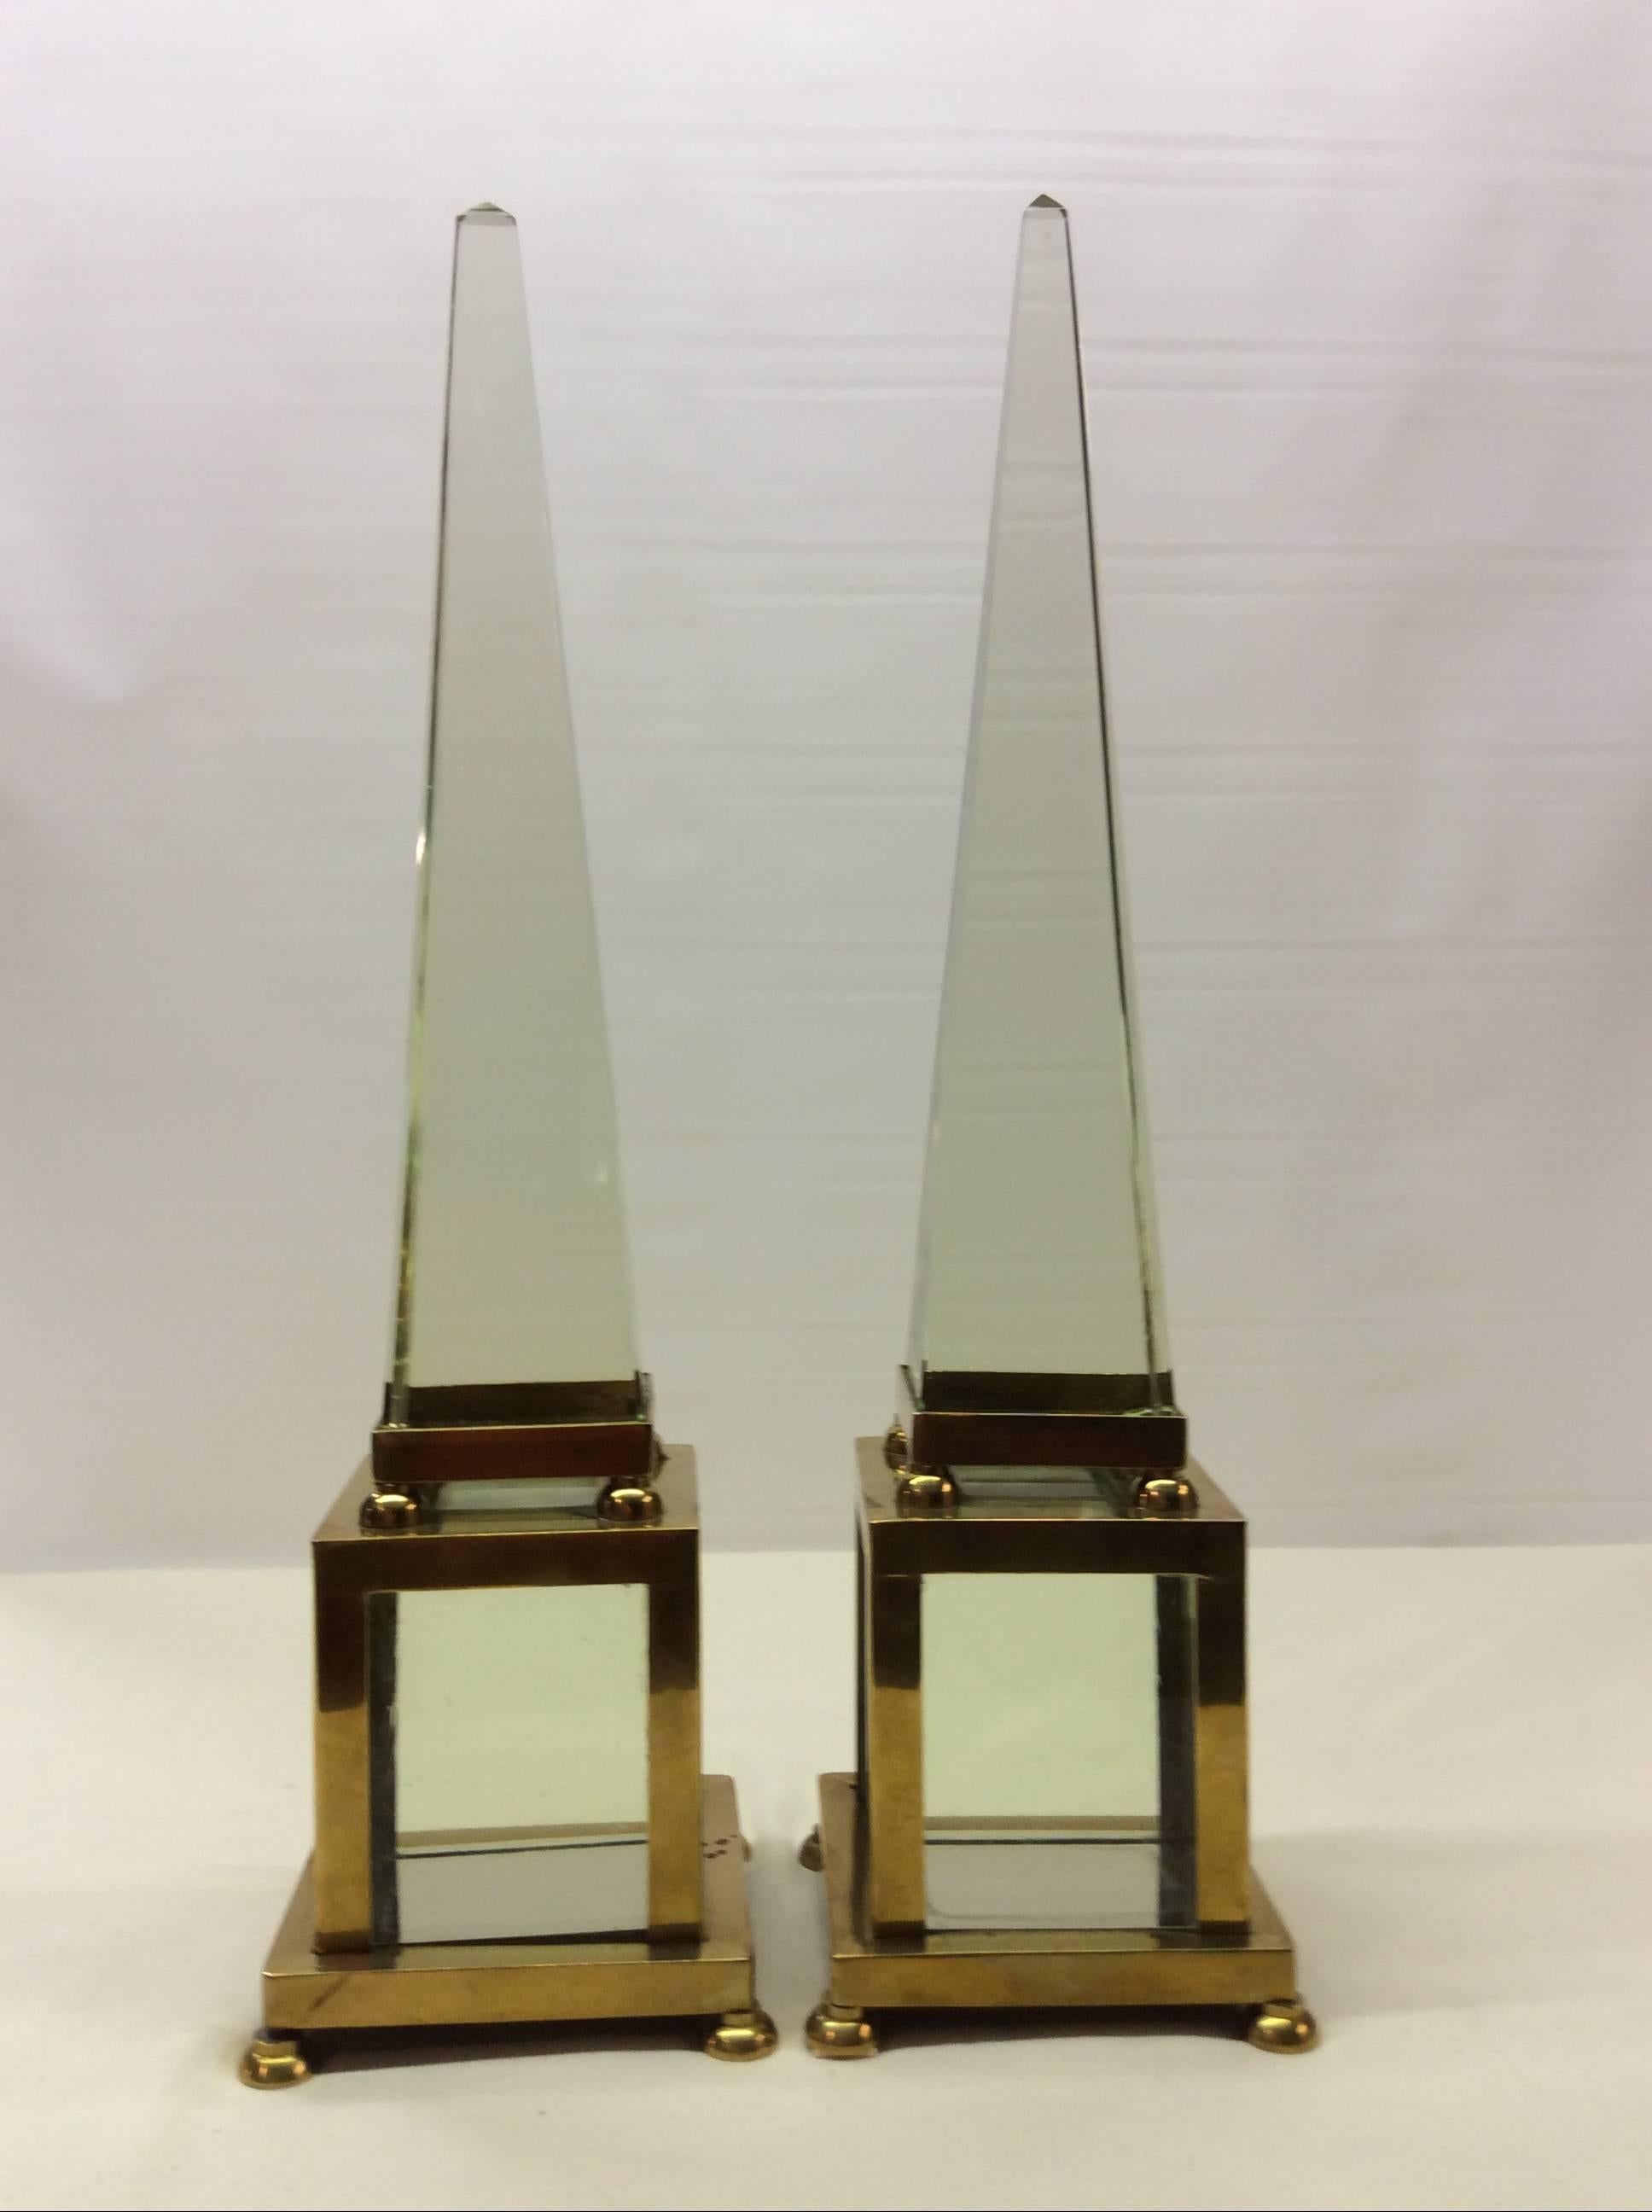 Impressive is not sufficient to describe there Classic pieces.
Pair of exquisite Mid-Century obelisks
Extraordinary quality brass encased pure prismatic crystal.
Crafted like pieces of fine jewelry. 
The heavy weight and density of the crystal